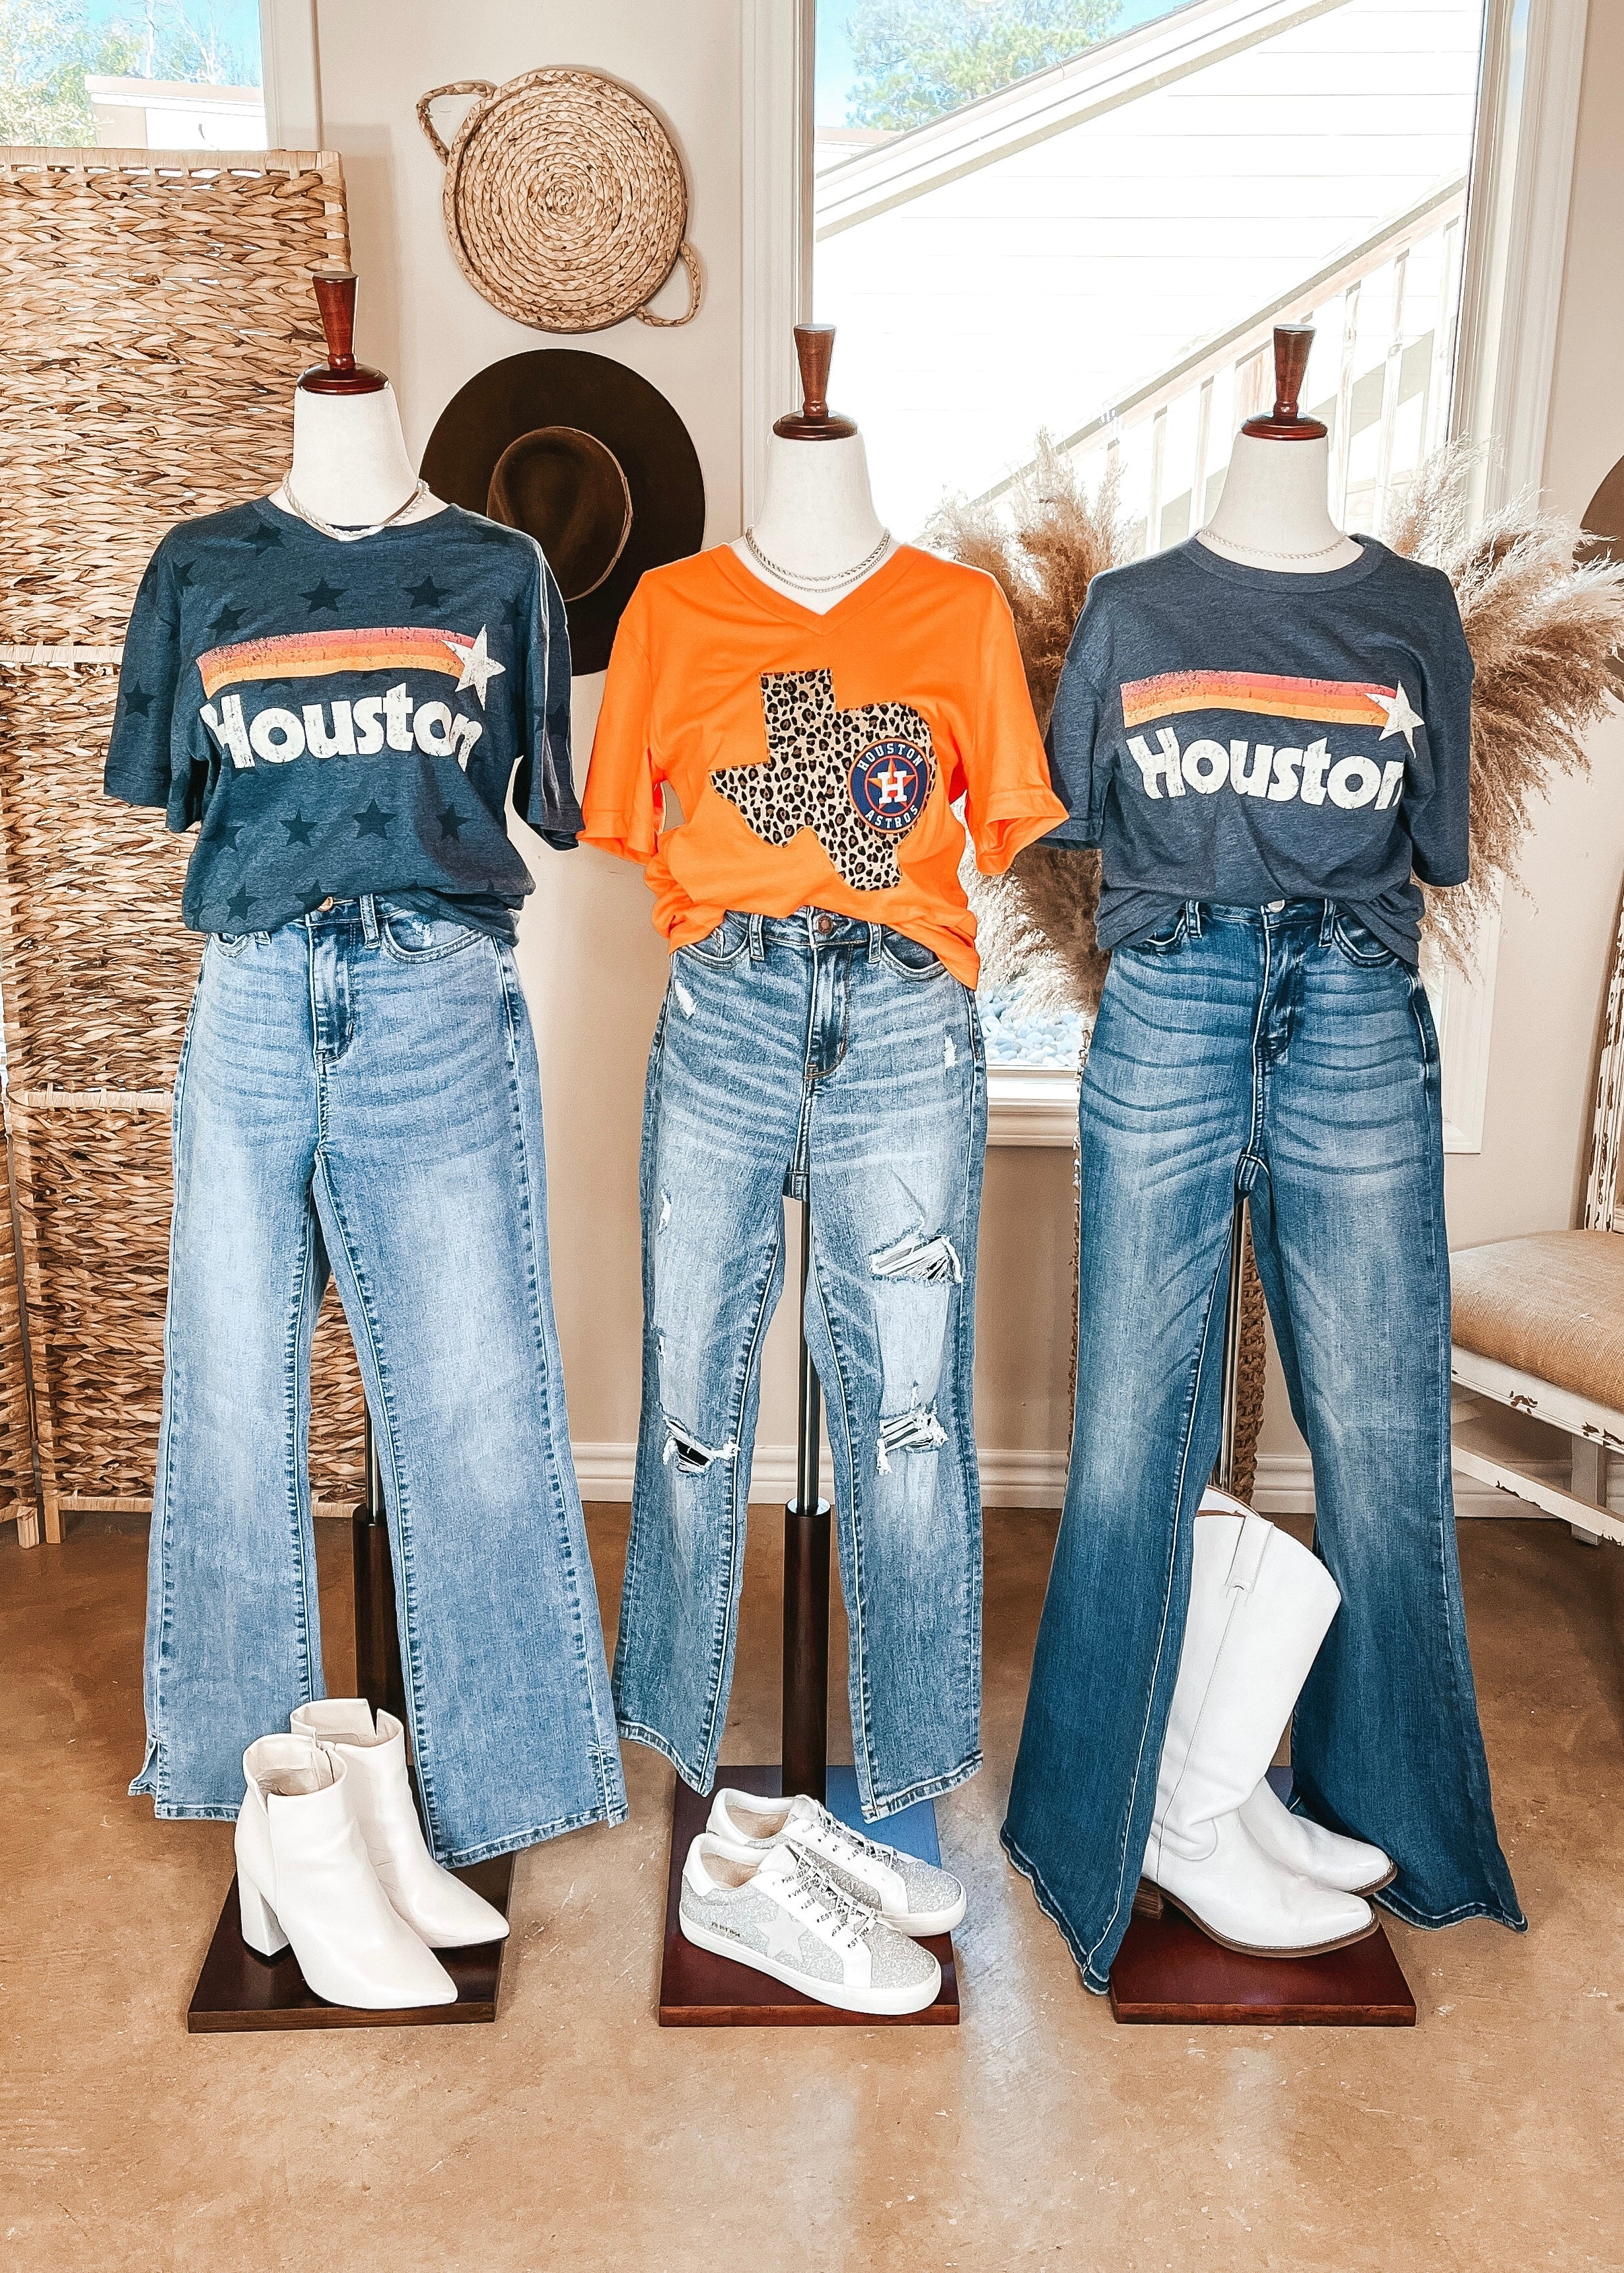 Astros Game Day | Astros Star Print Short Sleeve Graphic Tee in Heather Navy - Giddy Up Glamour Boutique